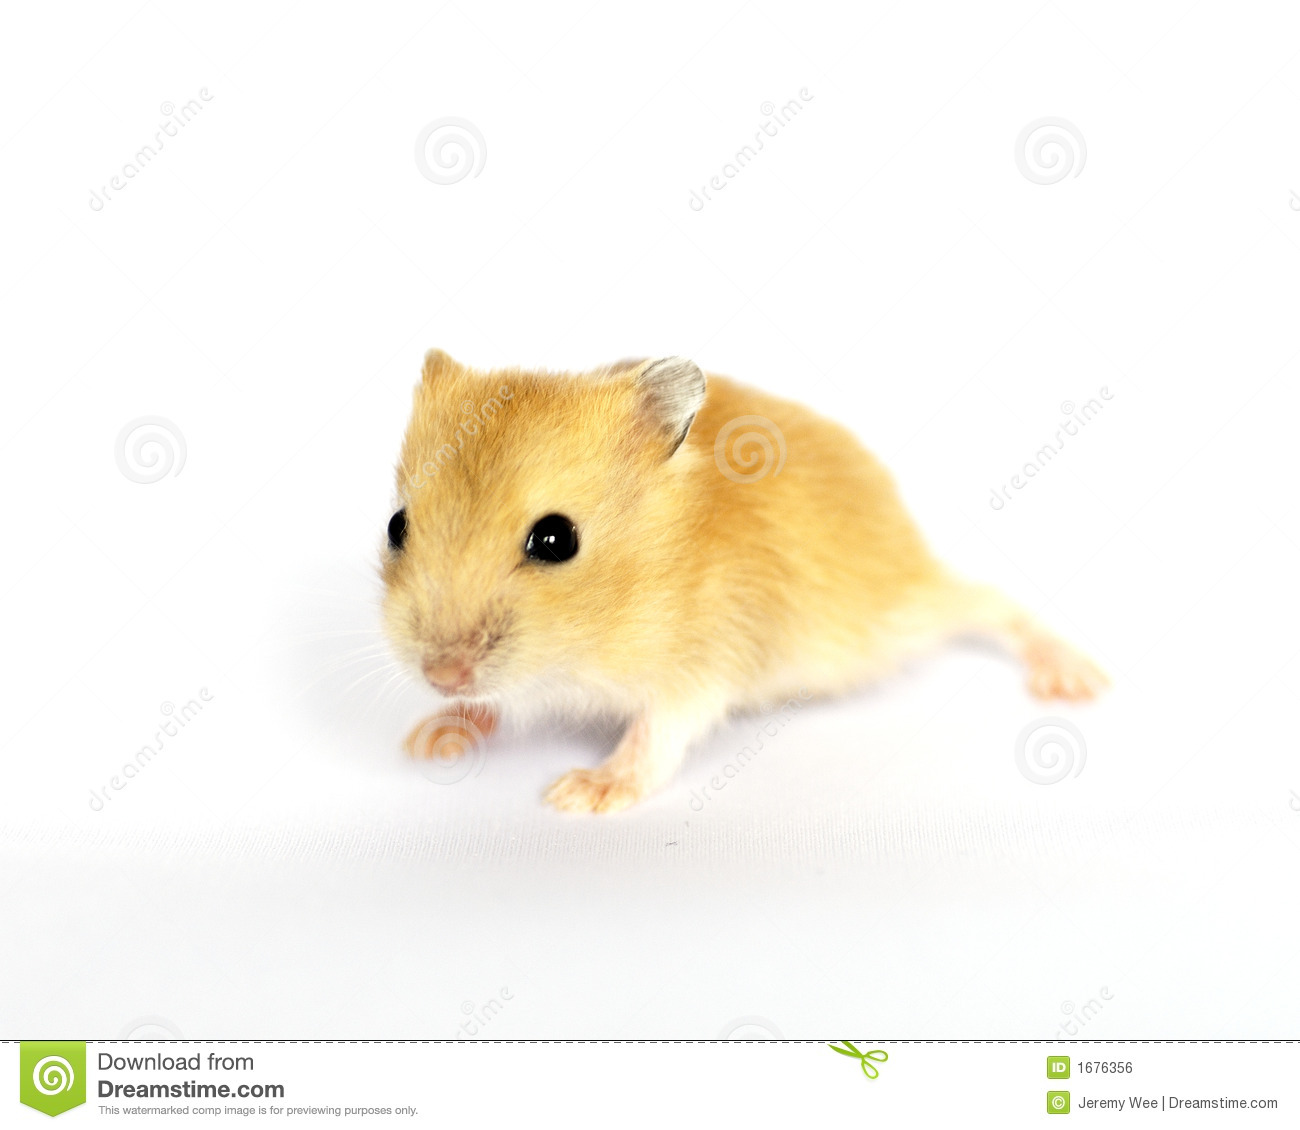 Cute Baby Hamster Royalty Free Stock Image   Image  1676356